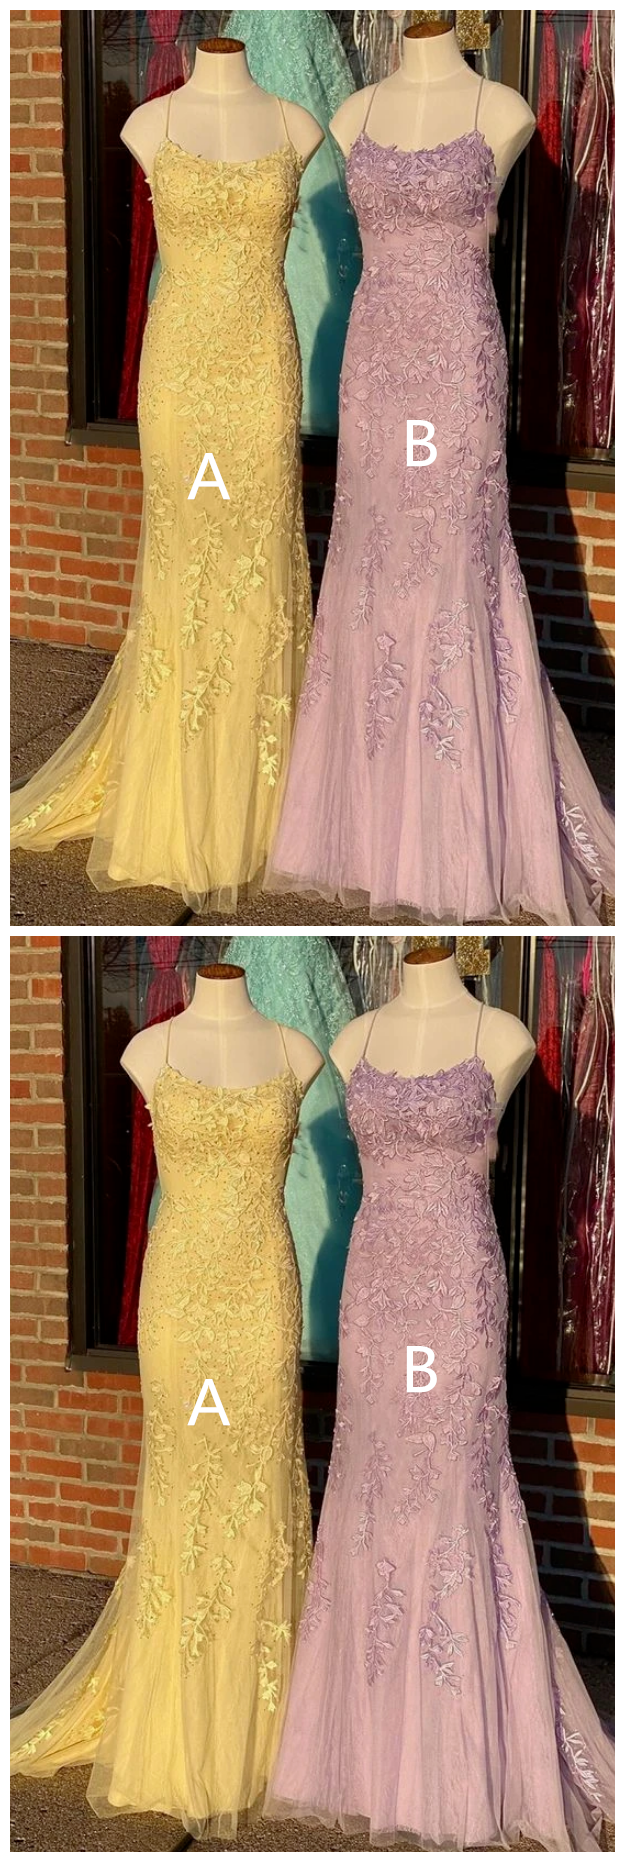 Mermaid Prom Dress With Applique And Beading Long Prom Dresses 8th Graduation Dress School Dance Winter Formal Dress